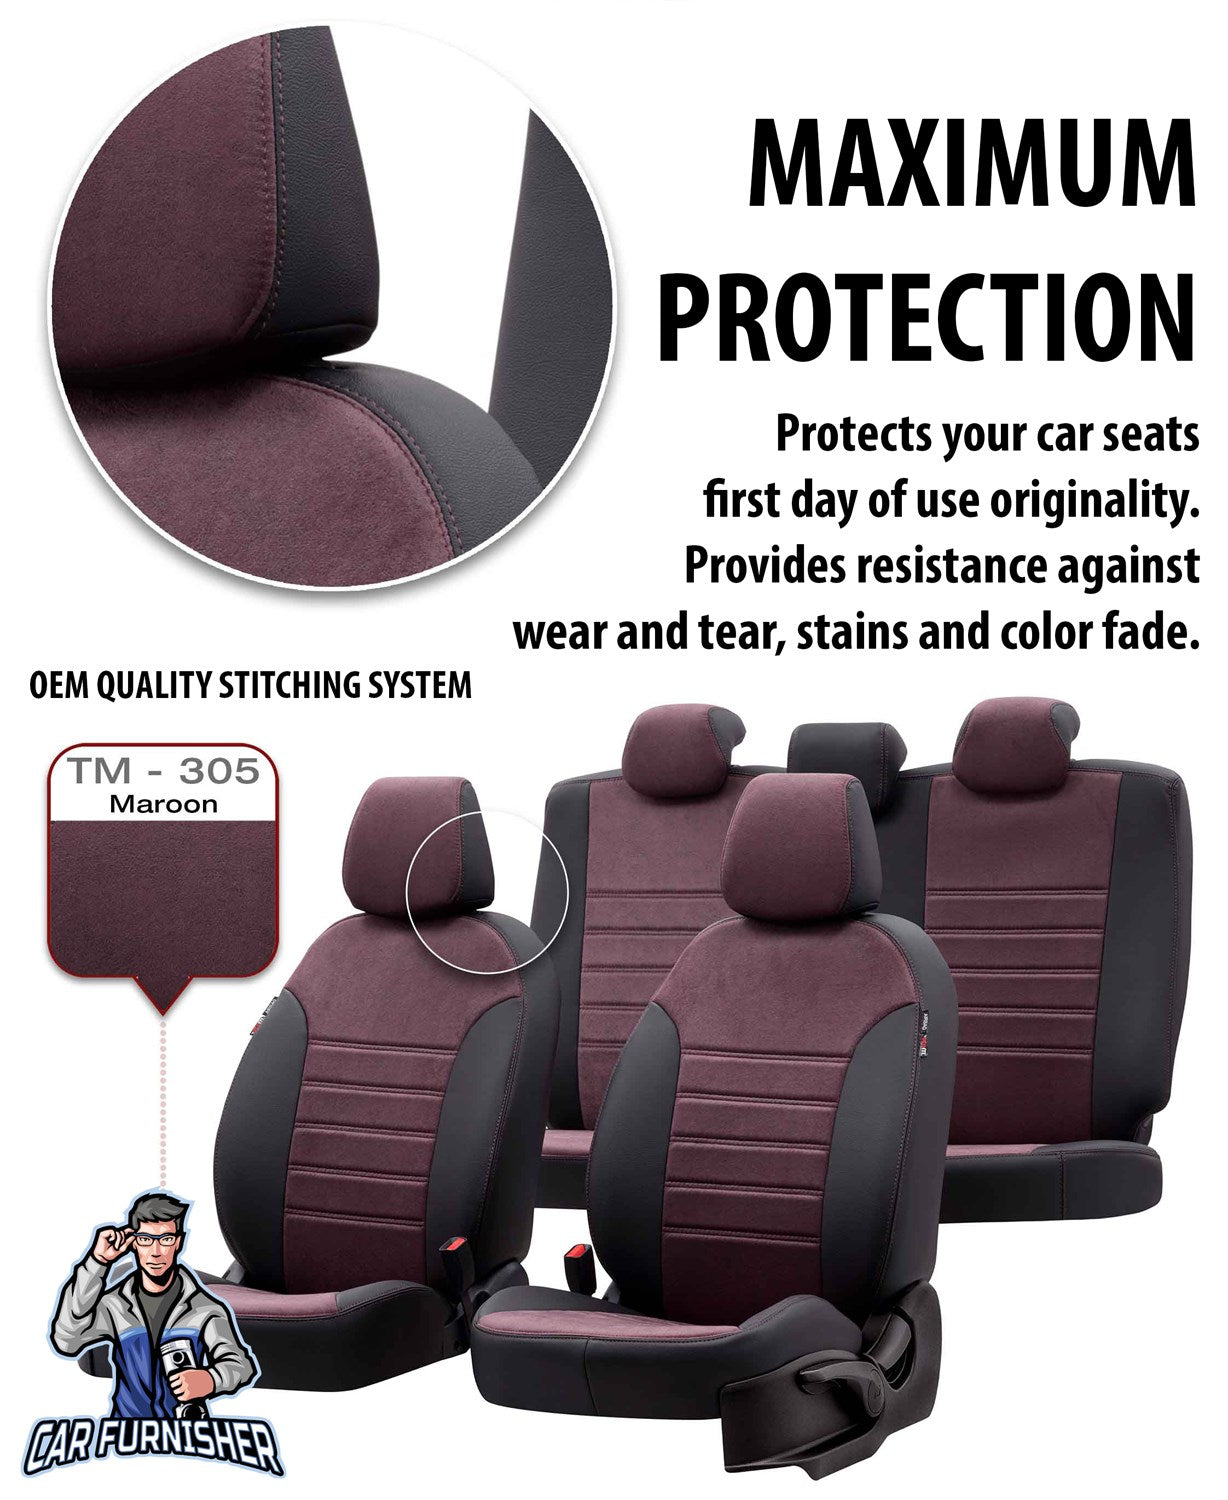 Proton Gen-2 Seat Covers Milano Suede Design Burgundy Leather & Suede Fabric